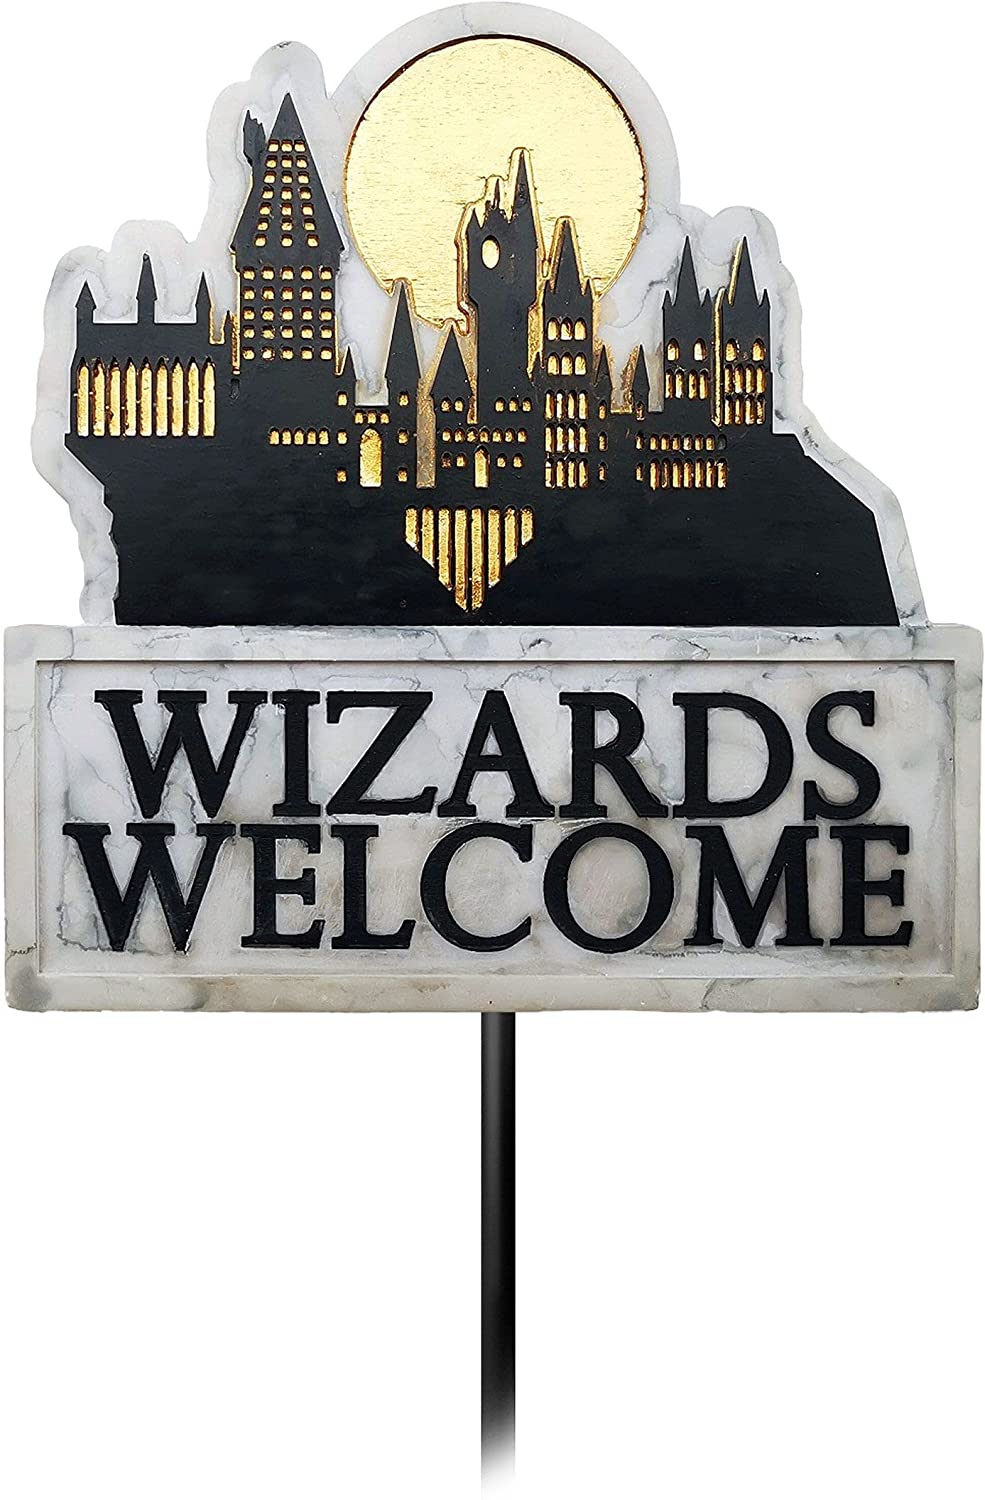 Wizards Welcome Harry Potter Hogwarts Castle Resin Garden Stake